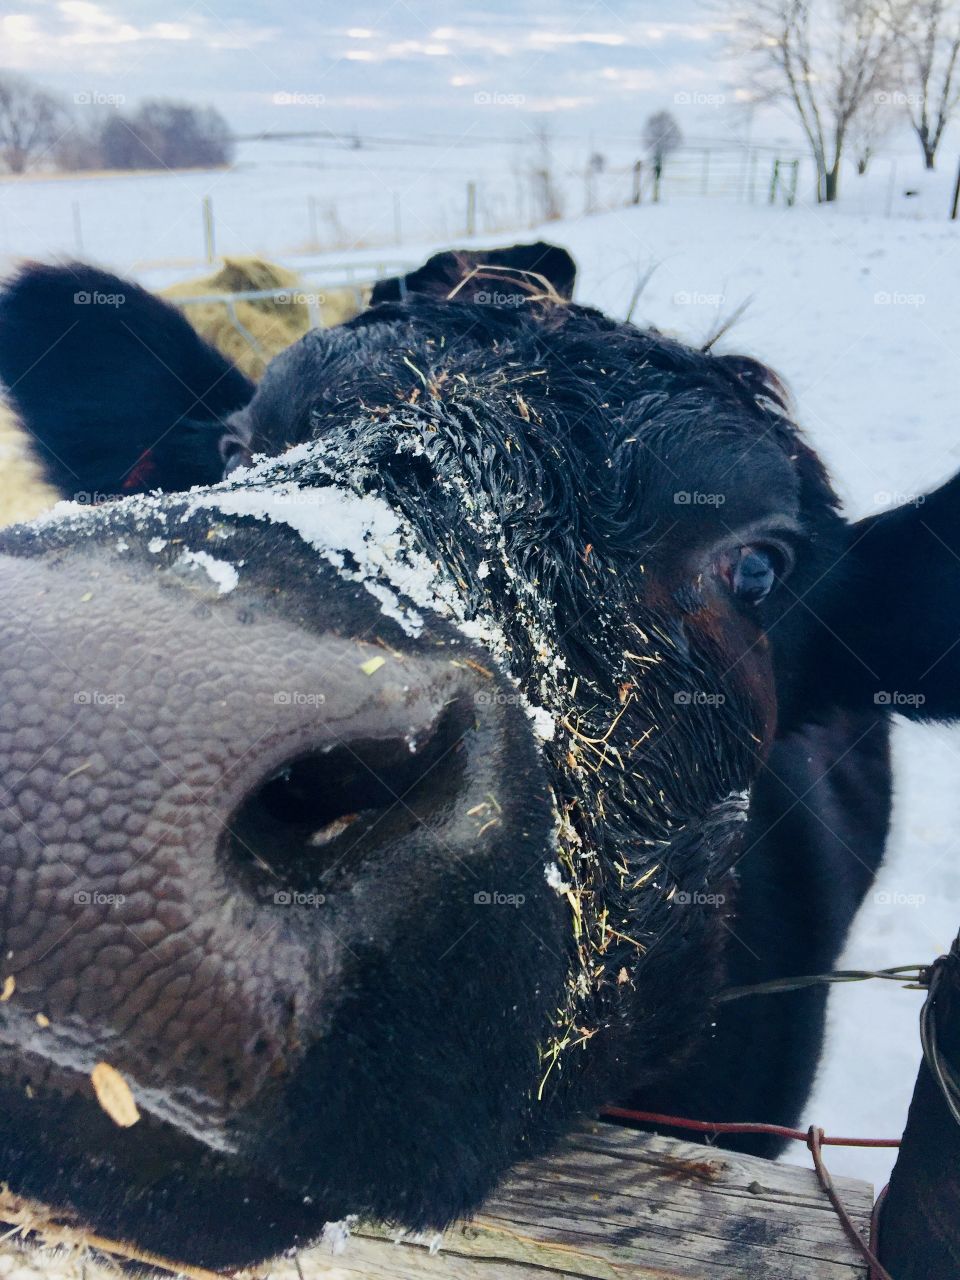 A black steer poking his nose over a fence, hoping for something fresh and green to eat during the winter instead of the hay in the feeder behind him